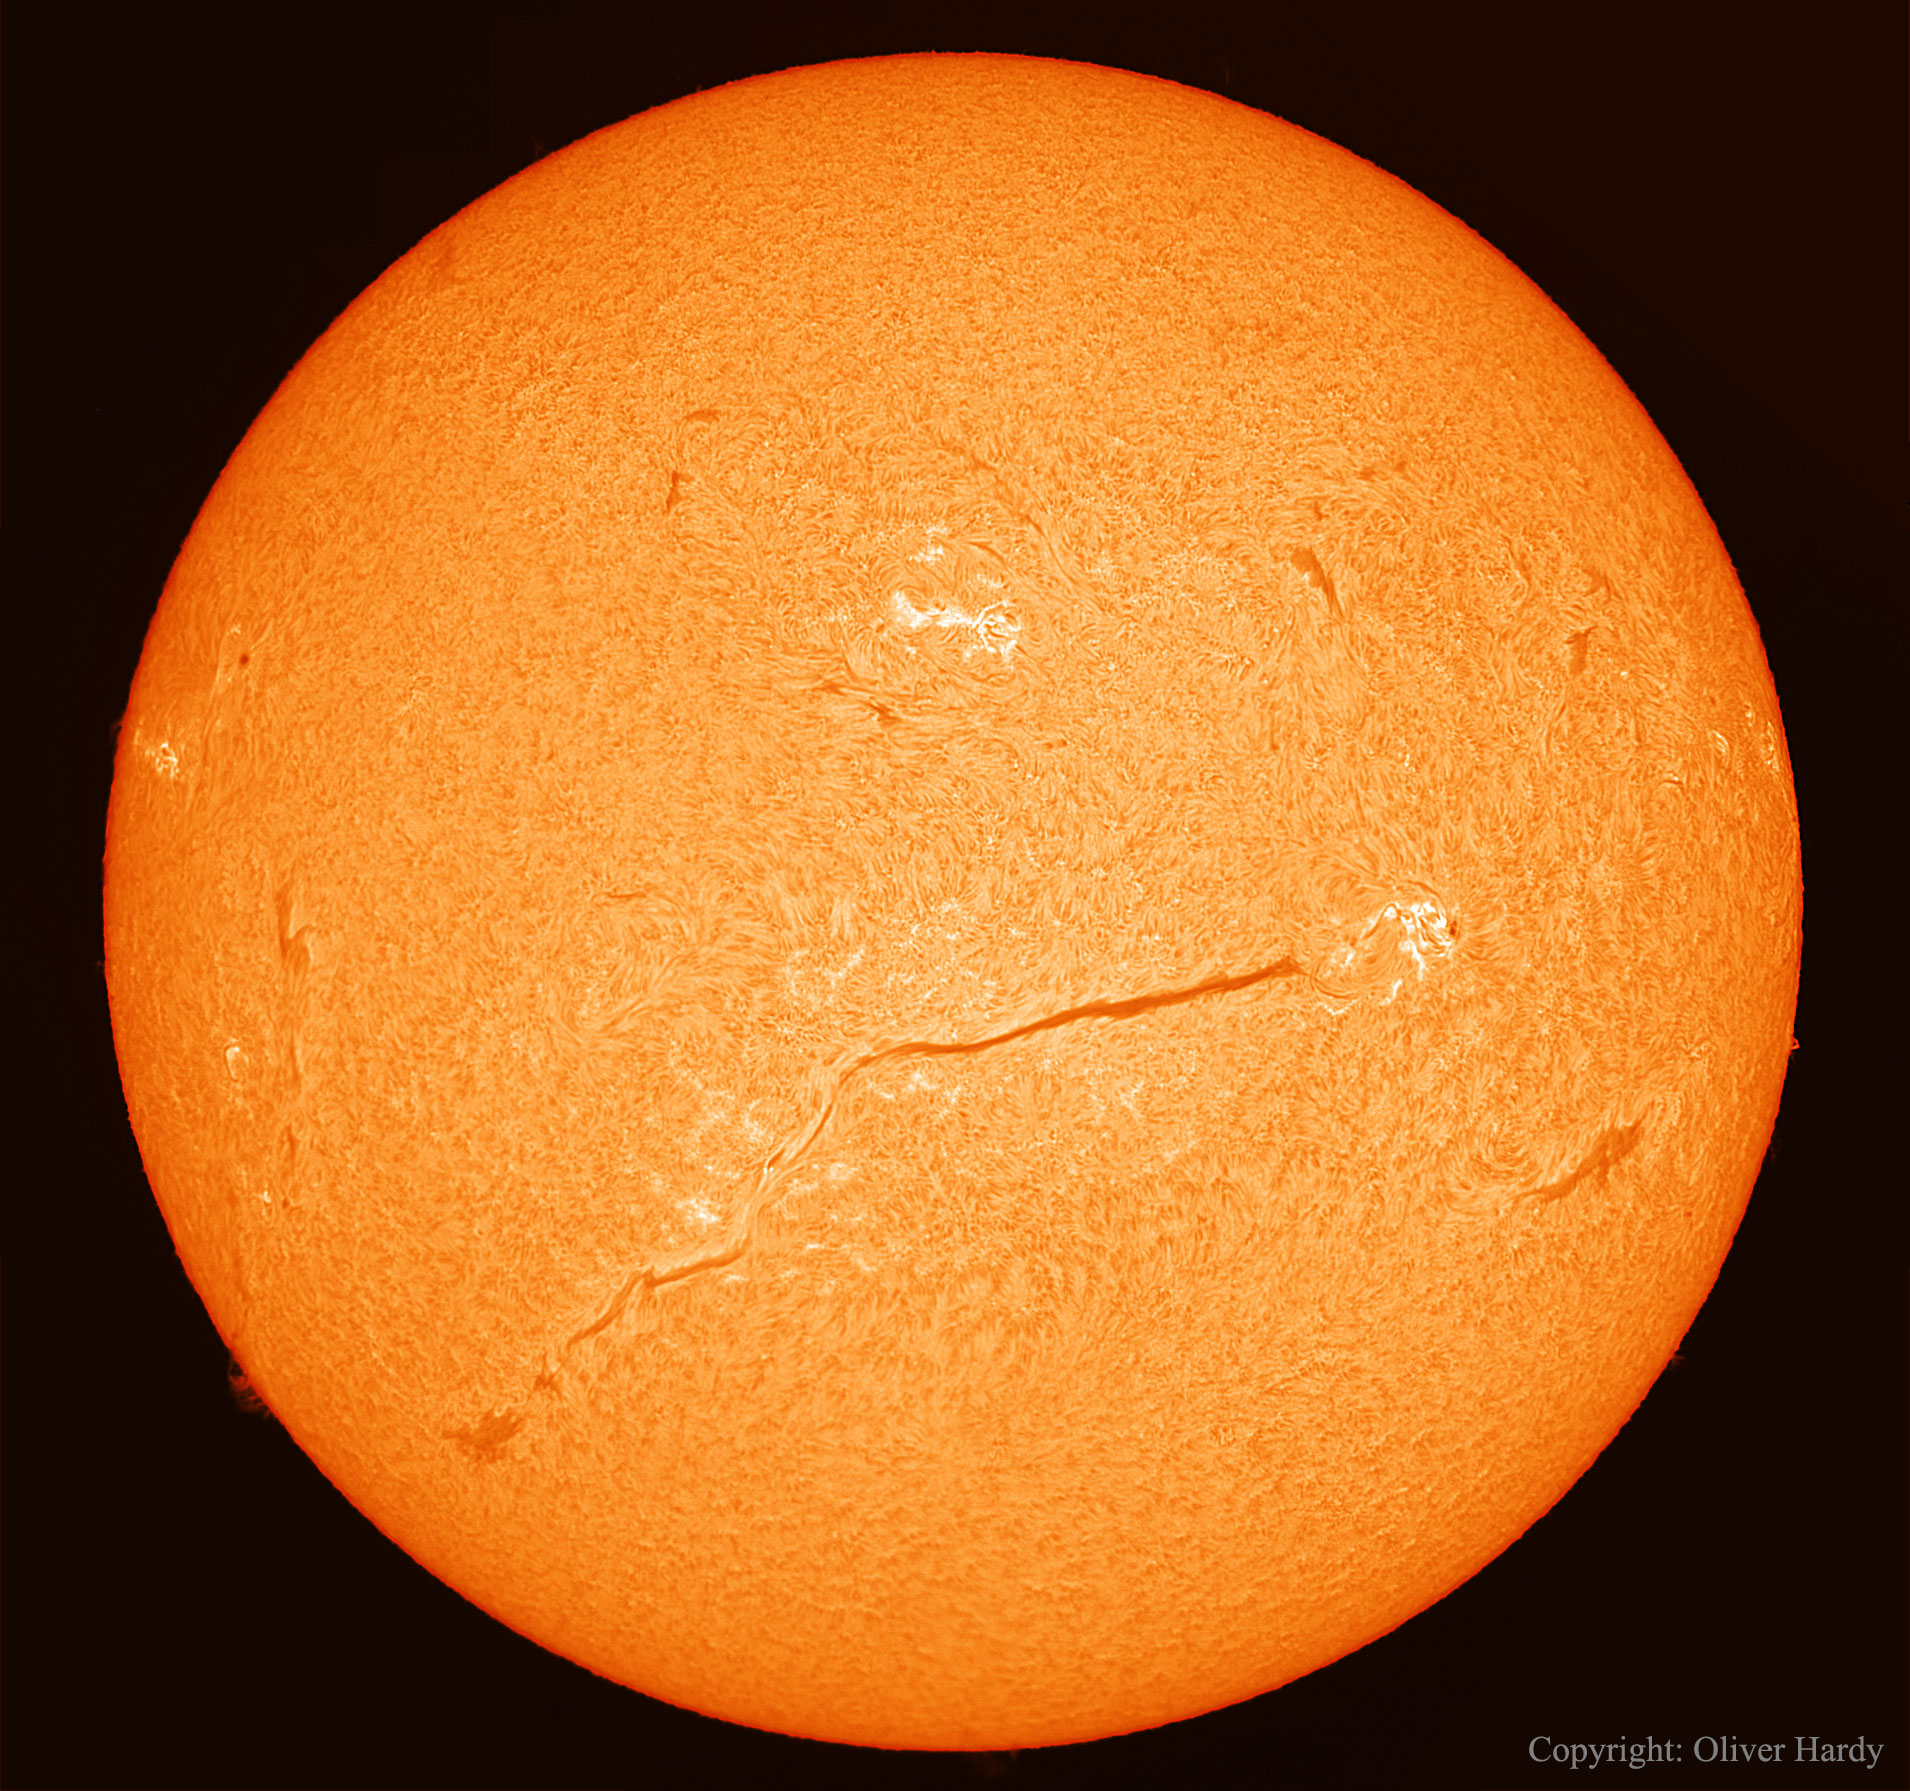 An Extremely Long Filament on the Sun